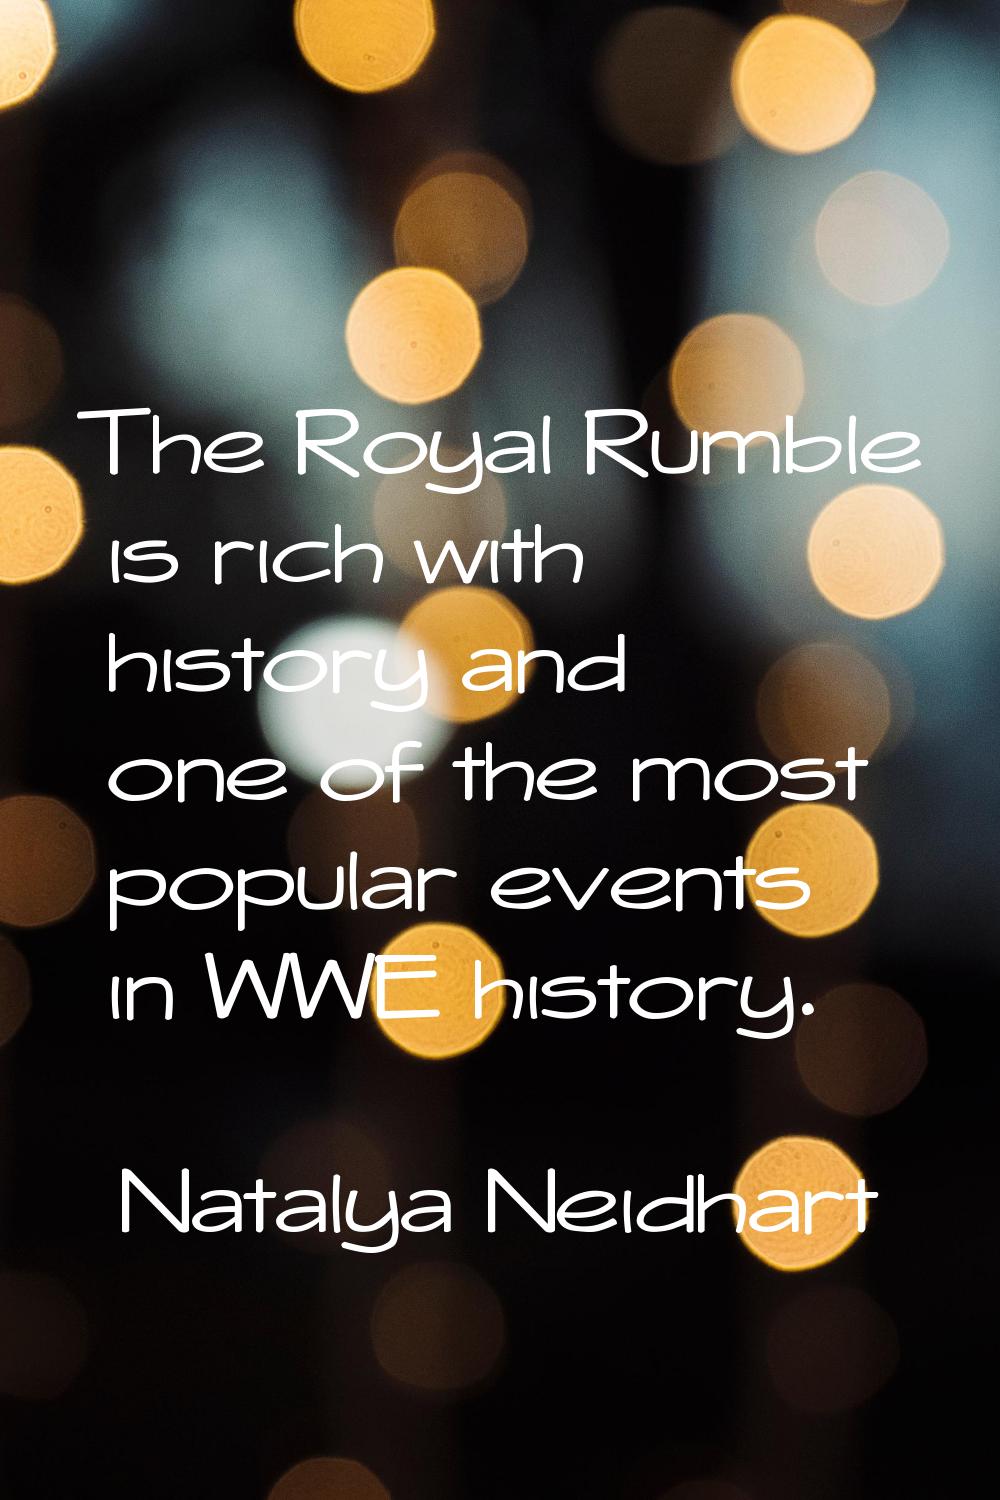 The Royal Rumble is rich with history and one of the most popular events in WWE history.